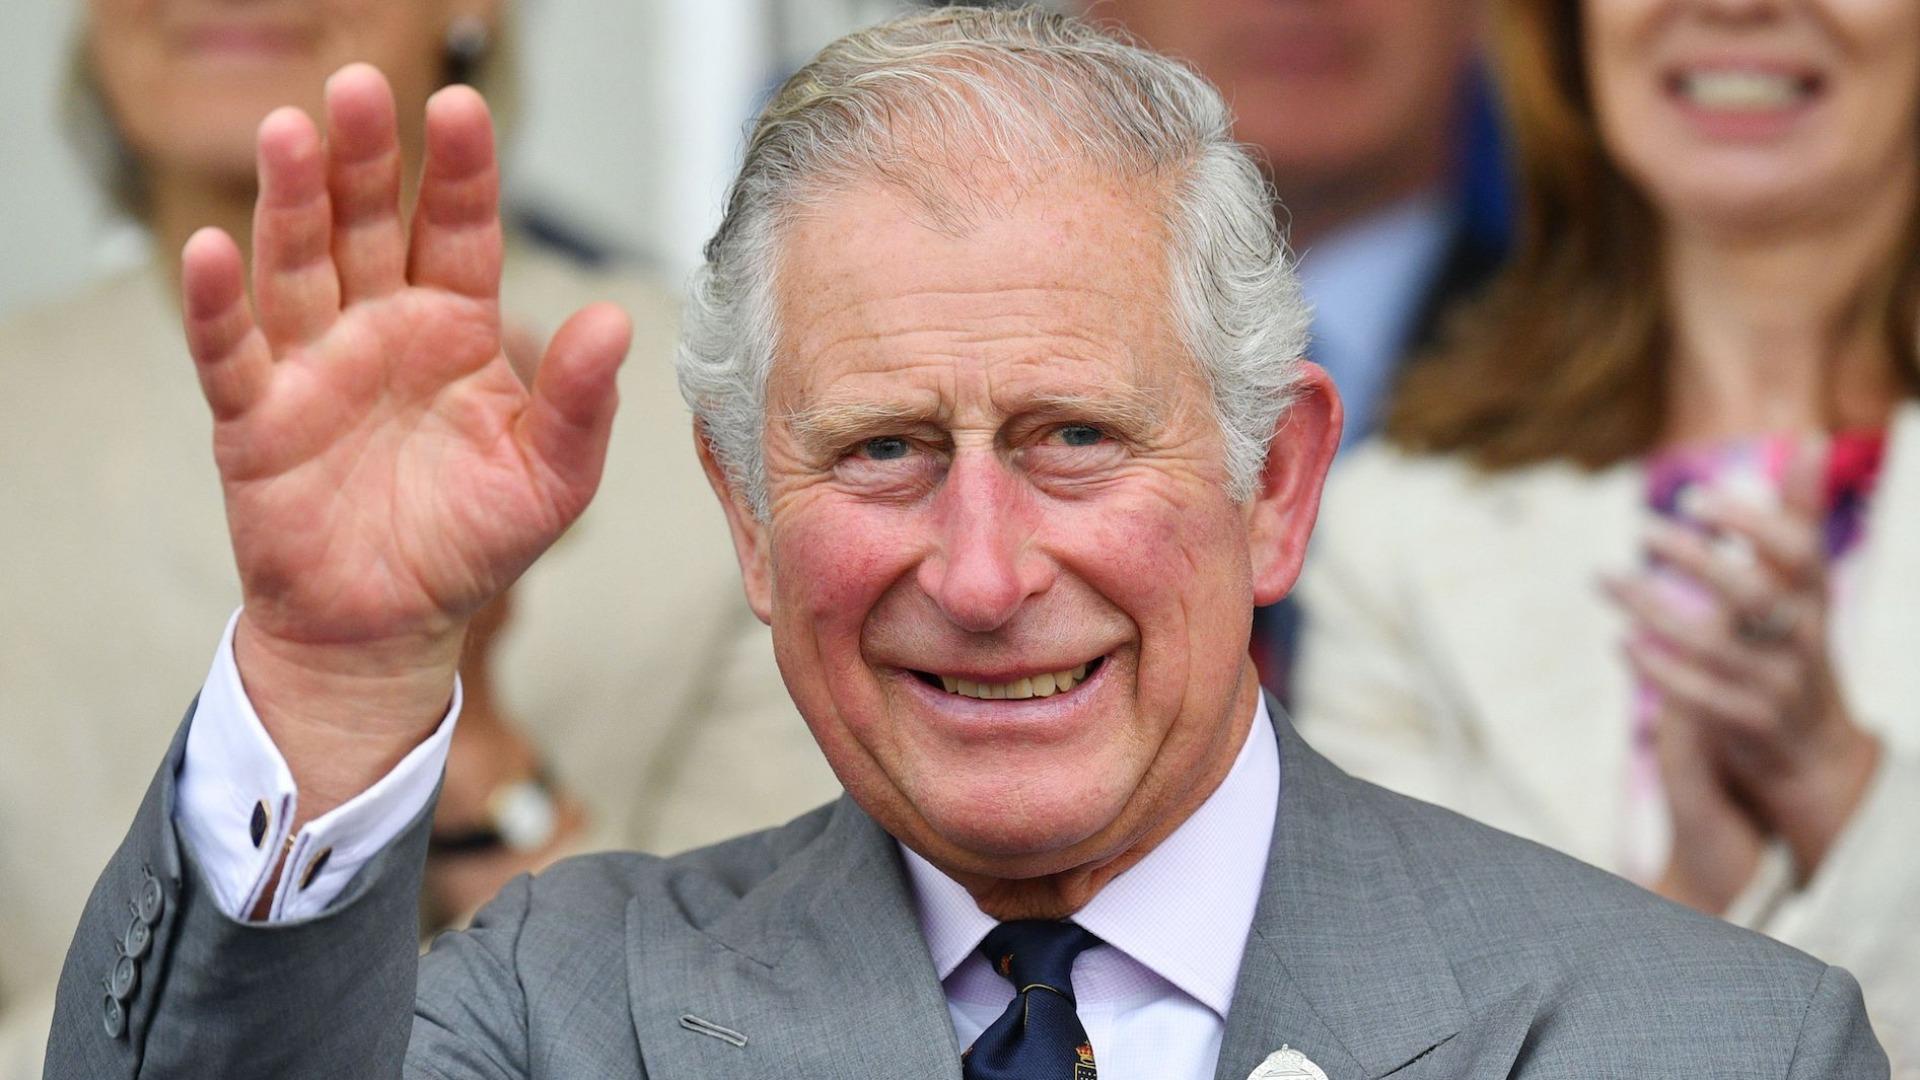 King Charles III to resume royal duties next week after cancer diagnosis